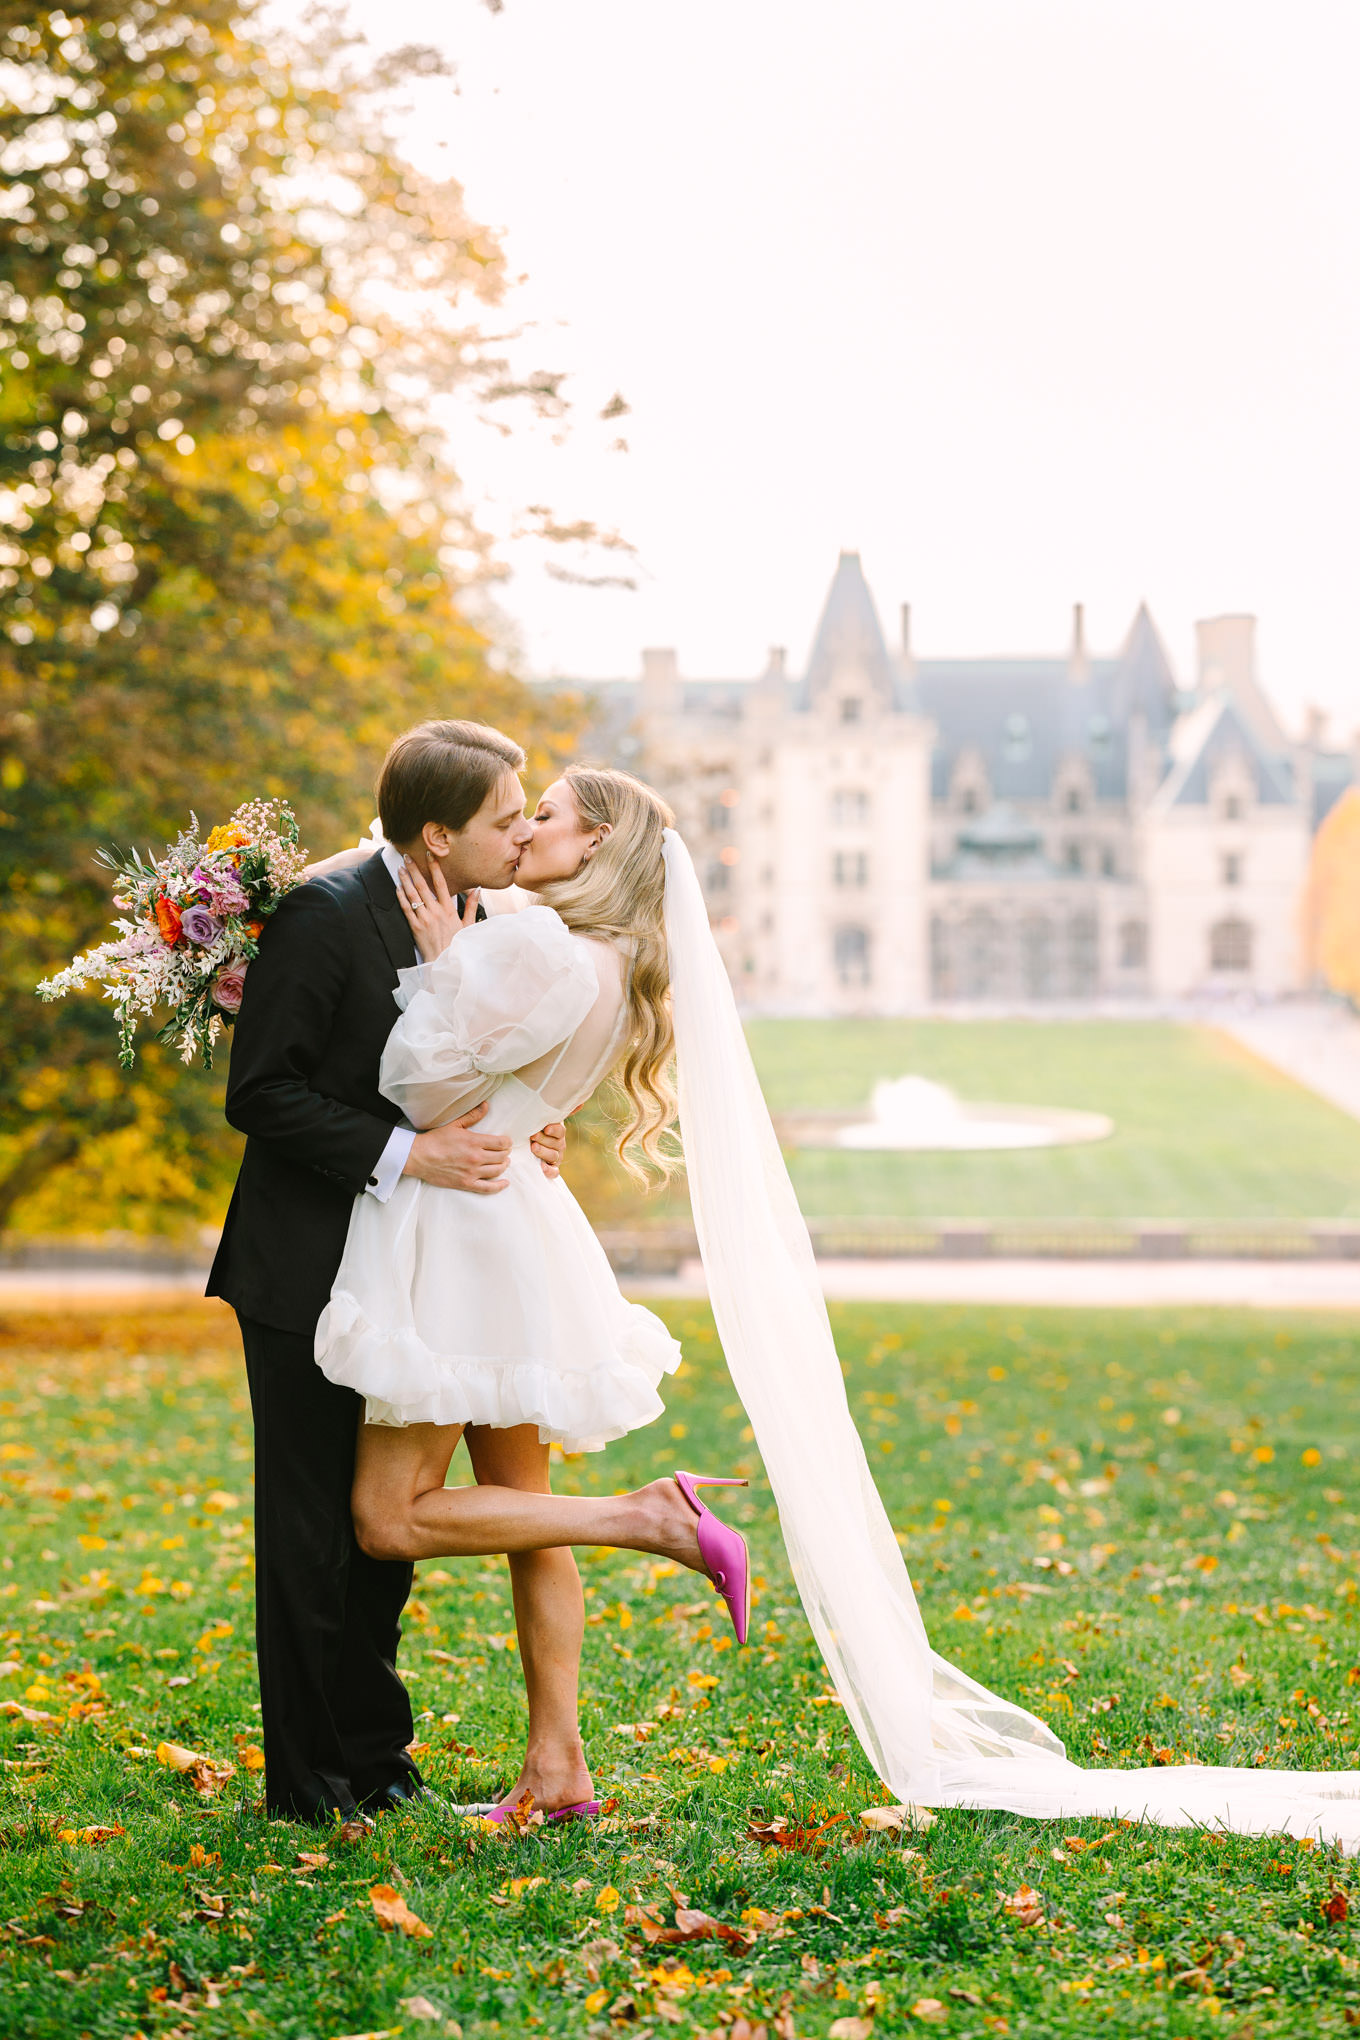 Biltmore Estate wedding in North Carolina | Wedding and elopement photography roundup | Los Angeles and Palm Springs  photographer | #losangeleswedding #palmspringswedding #elopementphotographer

Source: Mary Costa Photography | Los Angeles